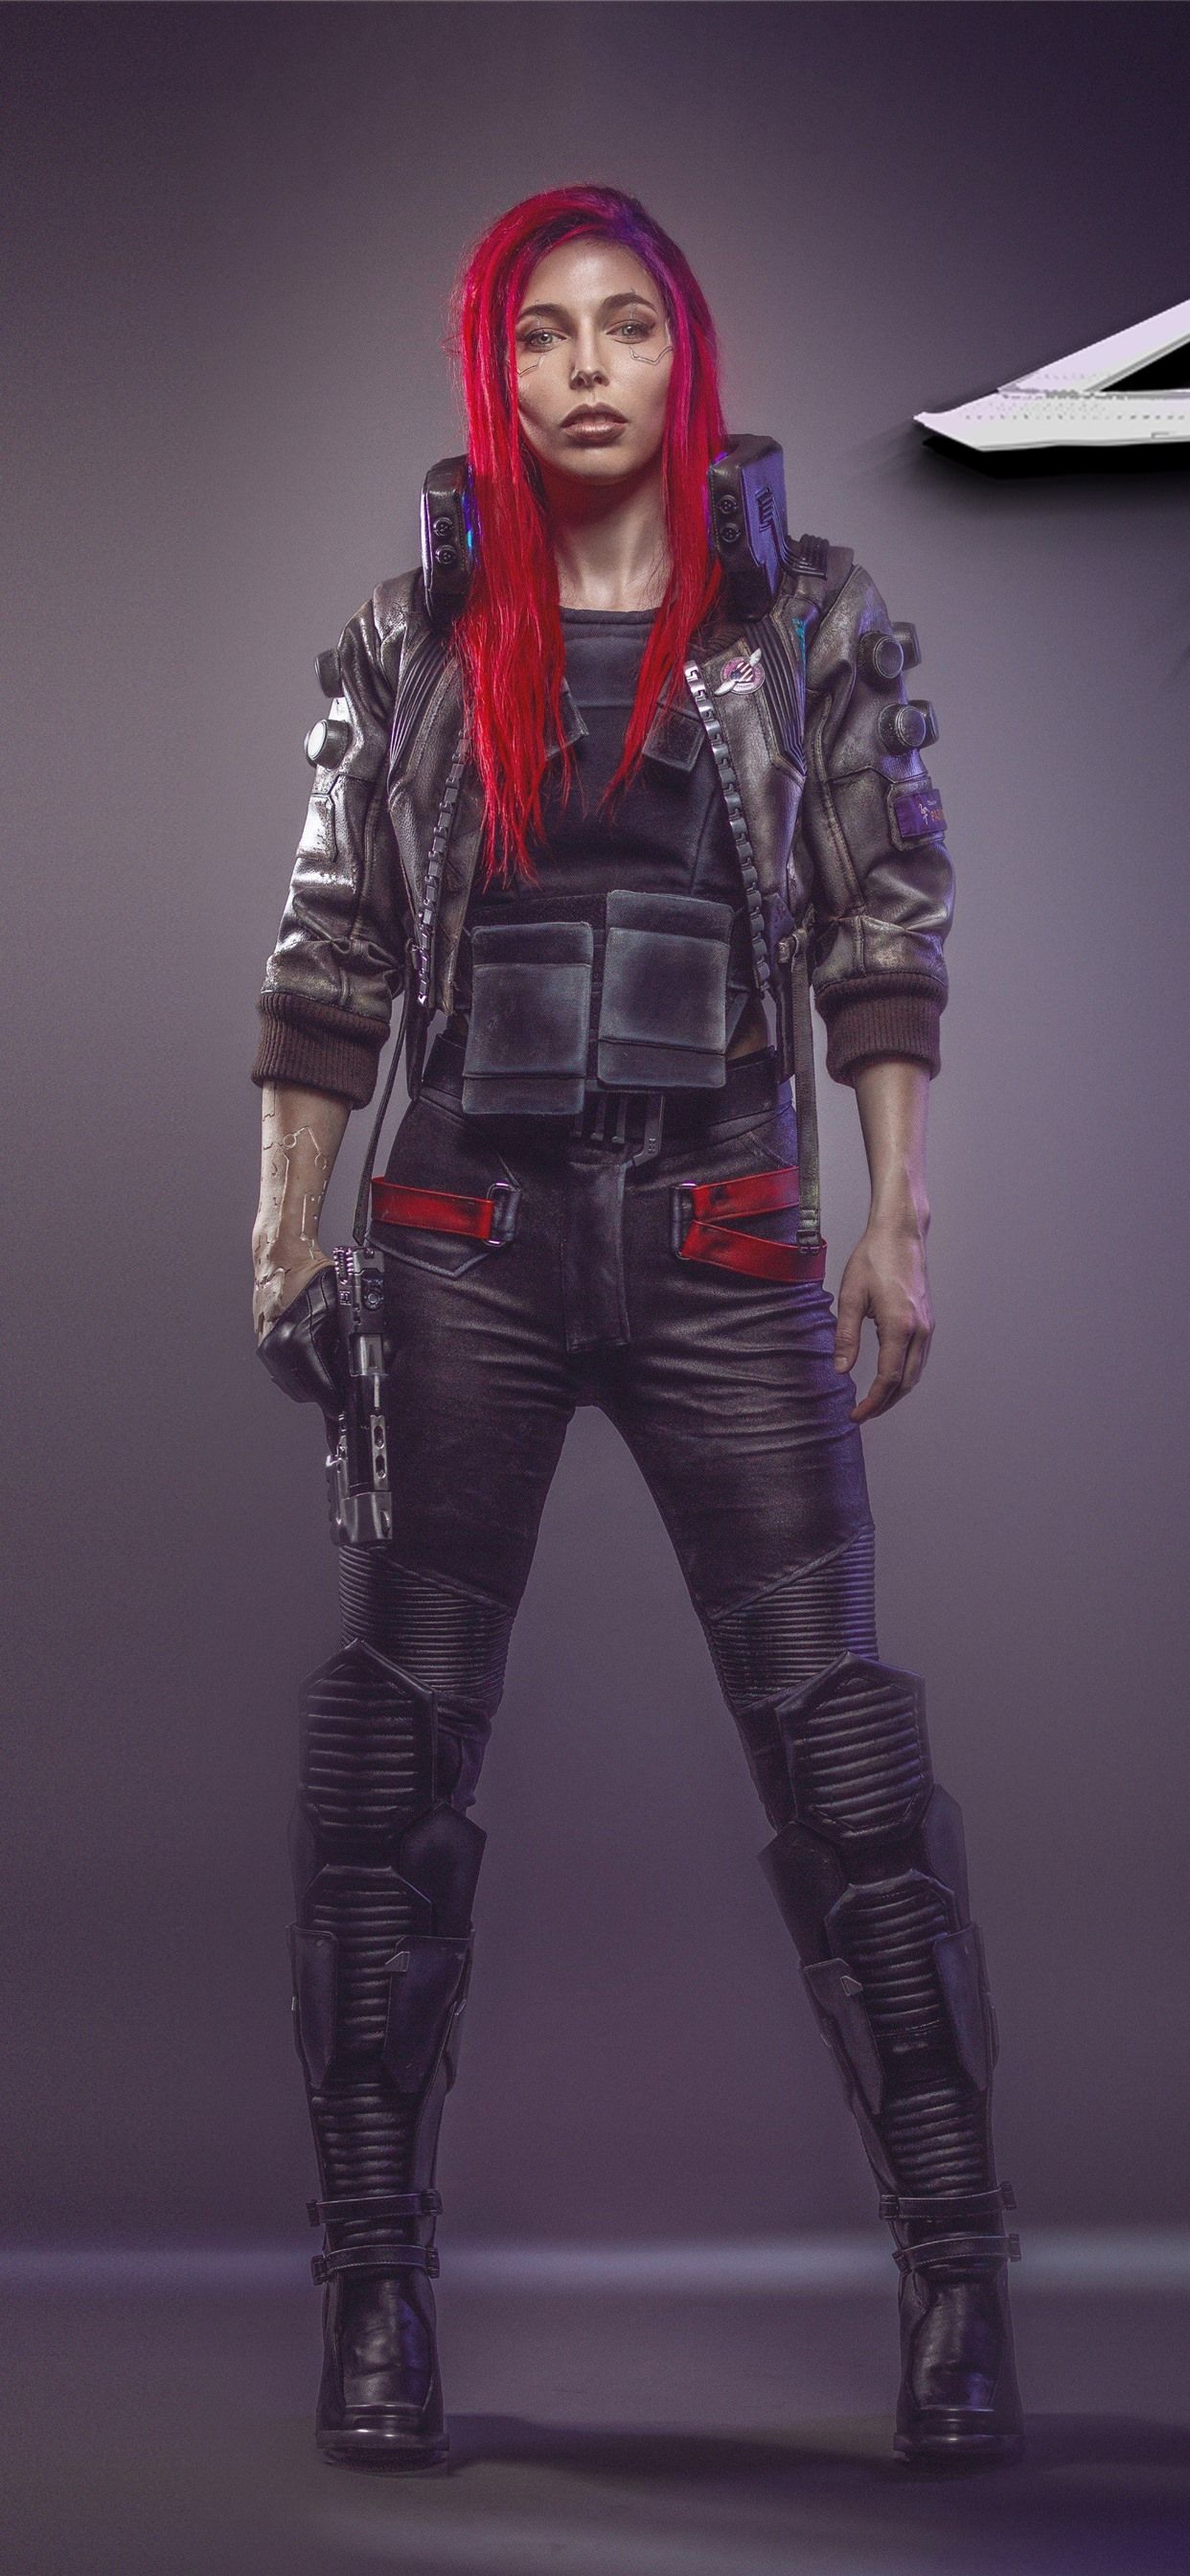 Cyberpunk 2077, red hair girl 1242x2688 iPhone 11 Pro/XS Max wallpaper, background, picture, image